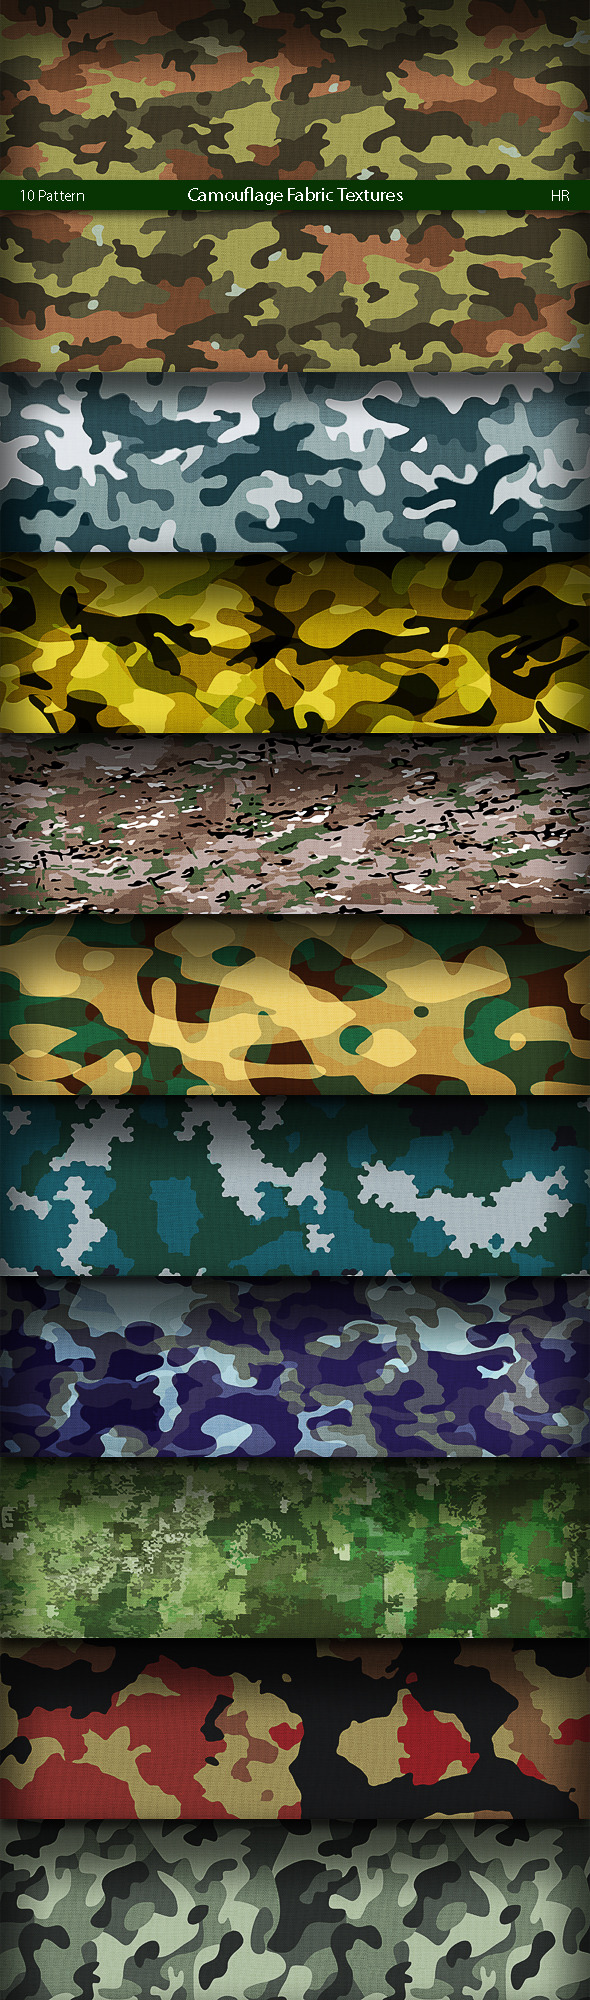 Camouflage Fabric Patterns